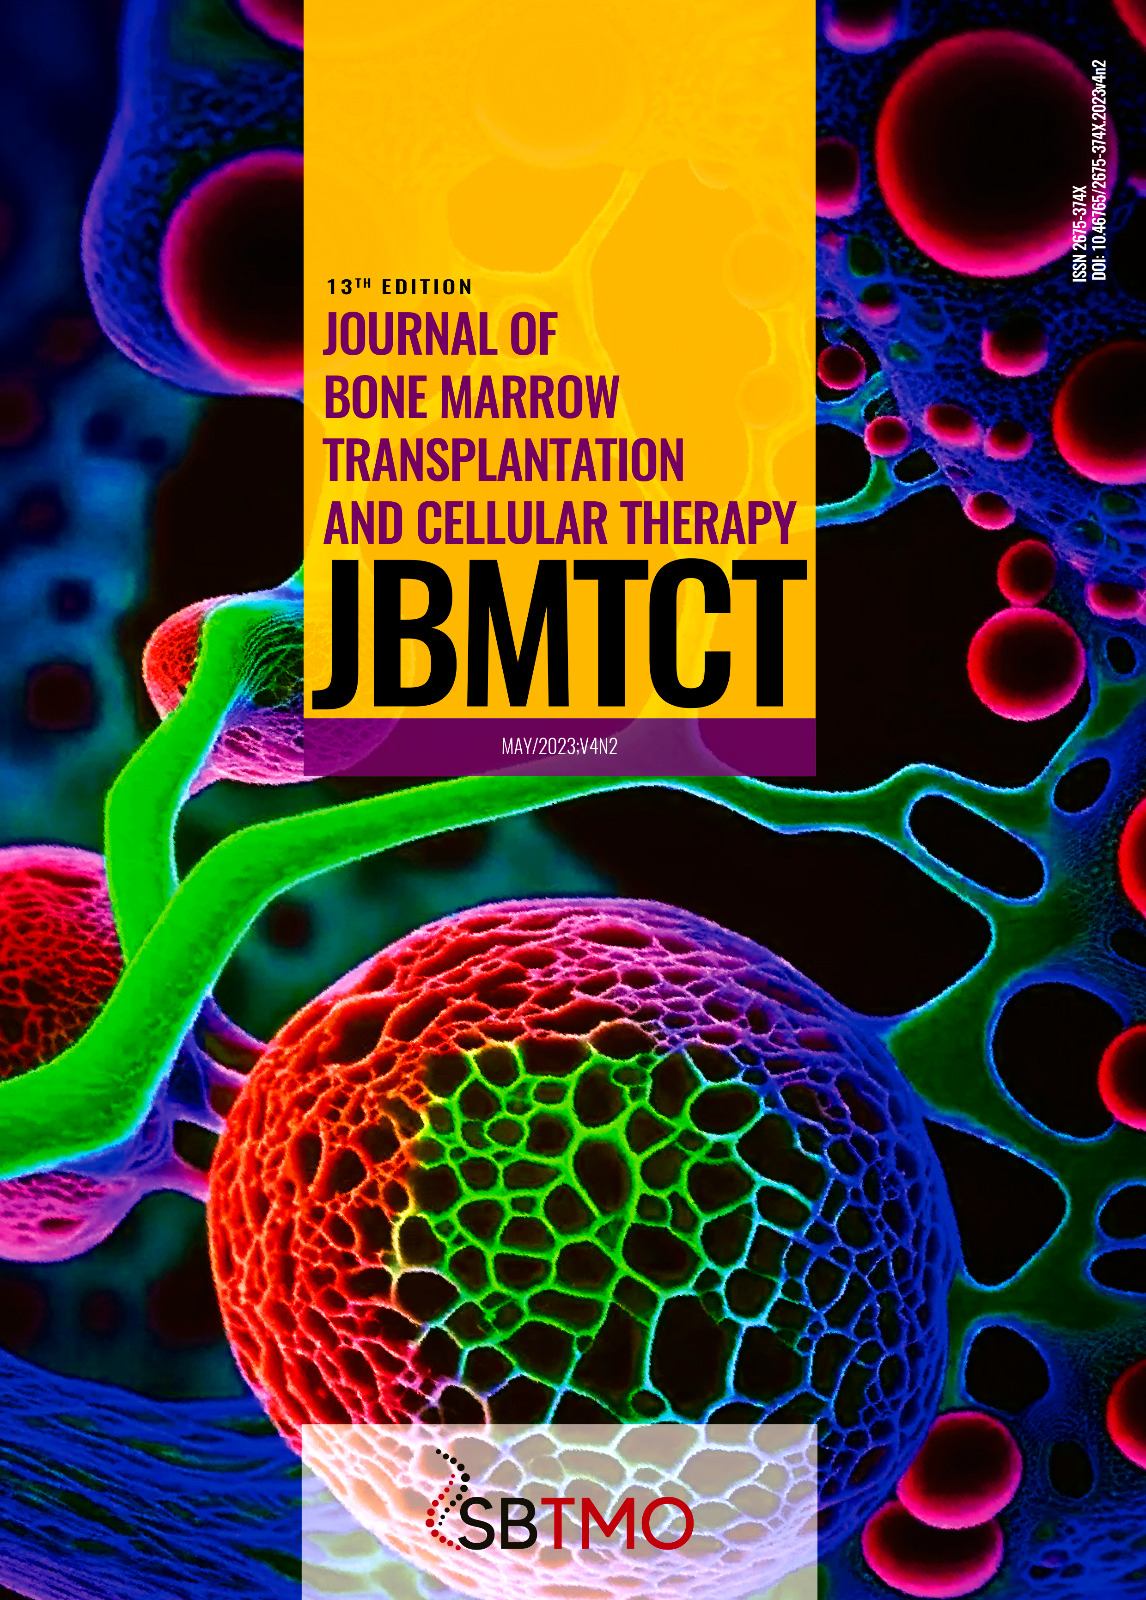 					View Vol. 4 No. 2 (2023):  JOURNAL OF BONE MARROW TRANSPLANTATION AND CELLULAR THERAPY
				